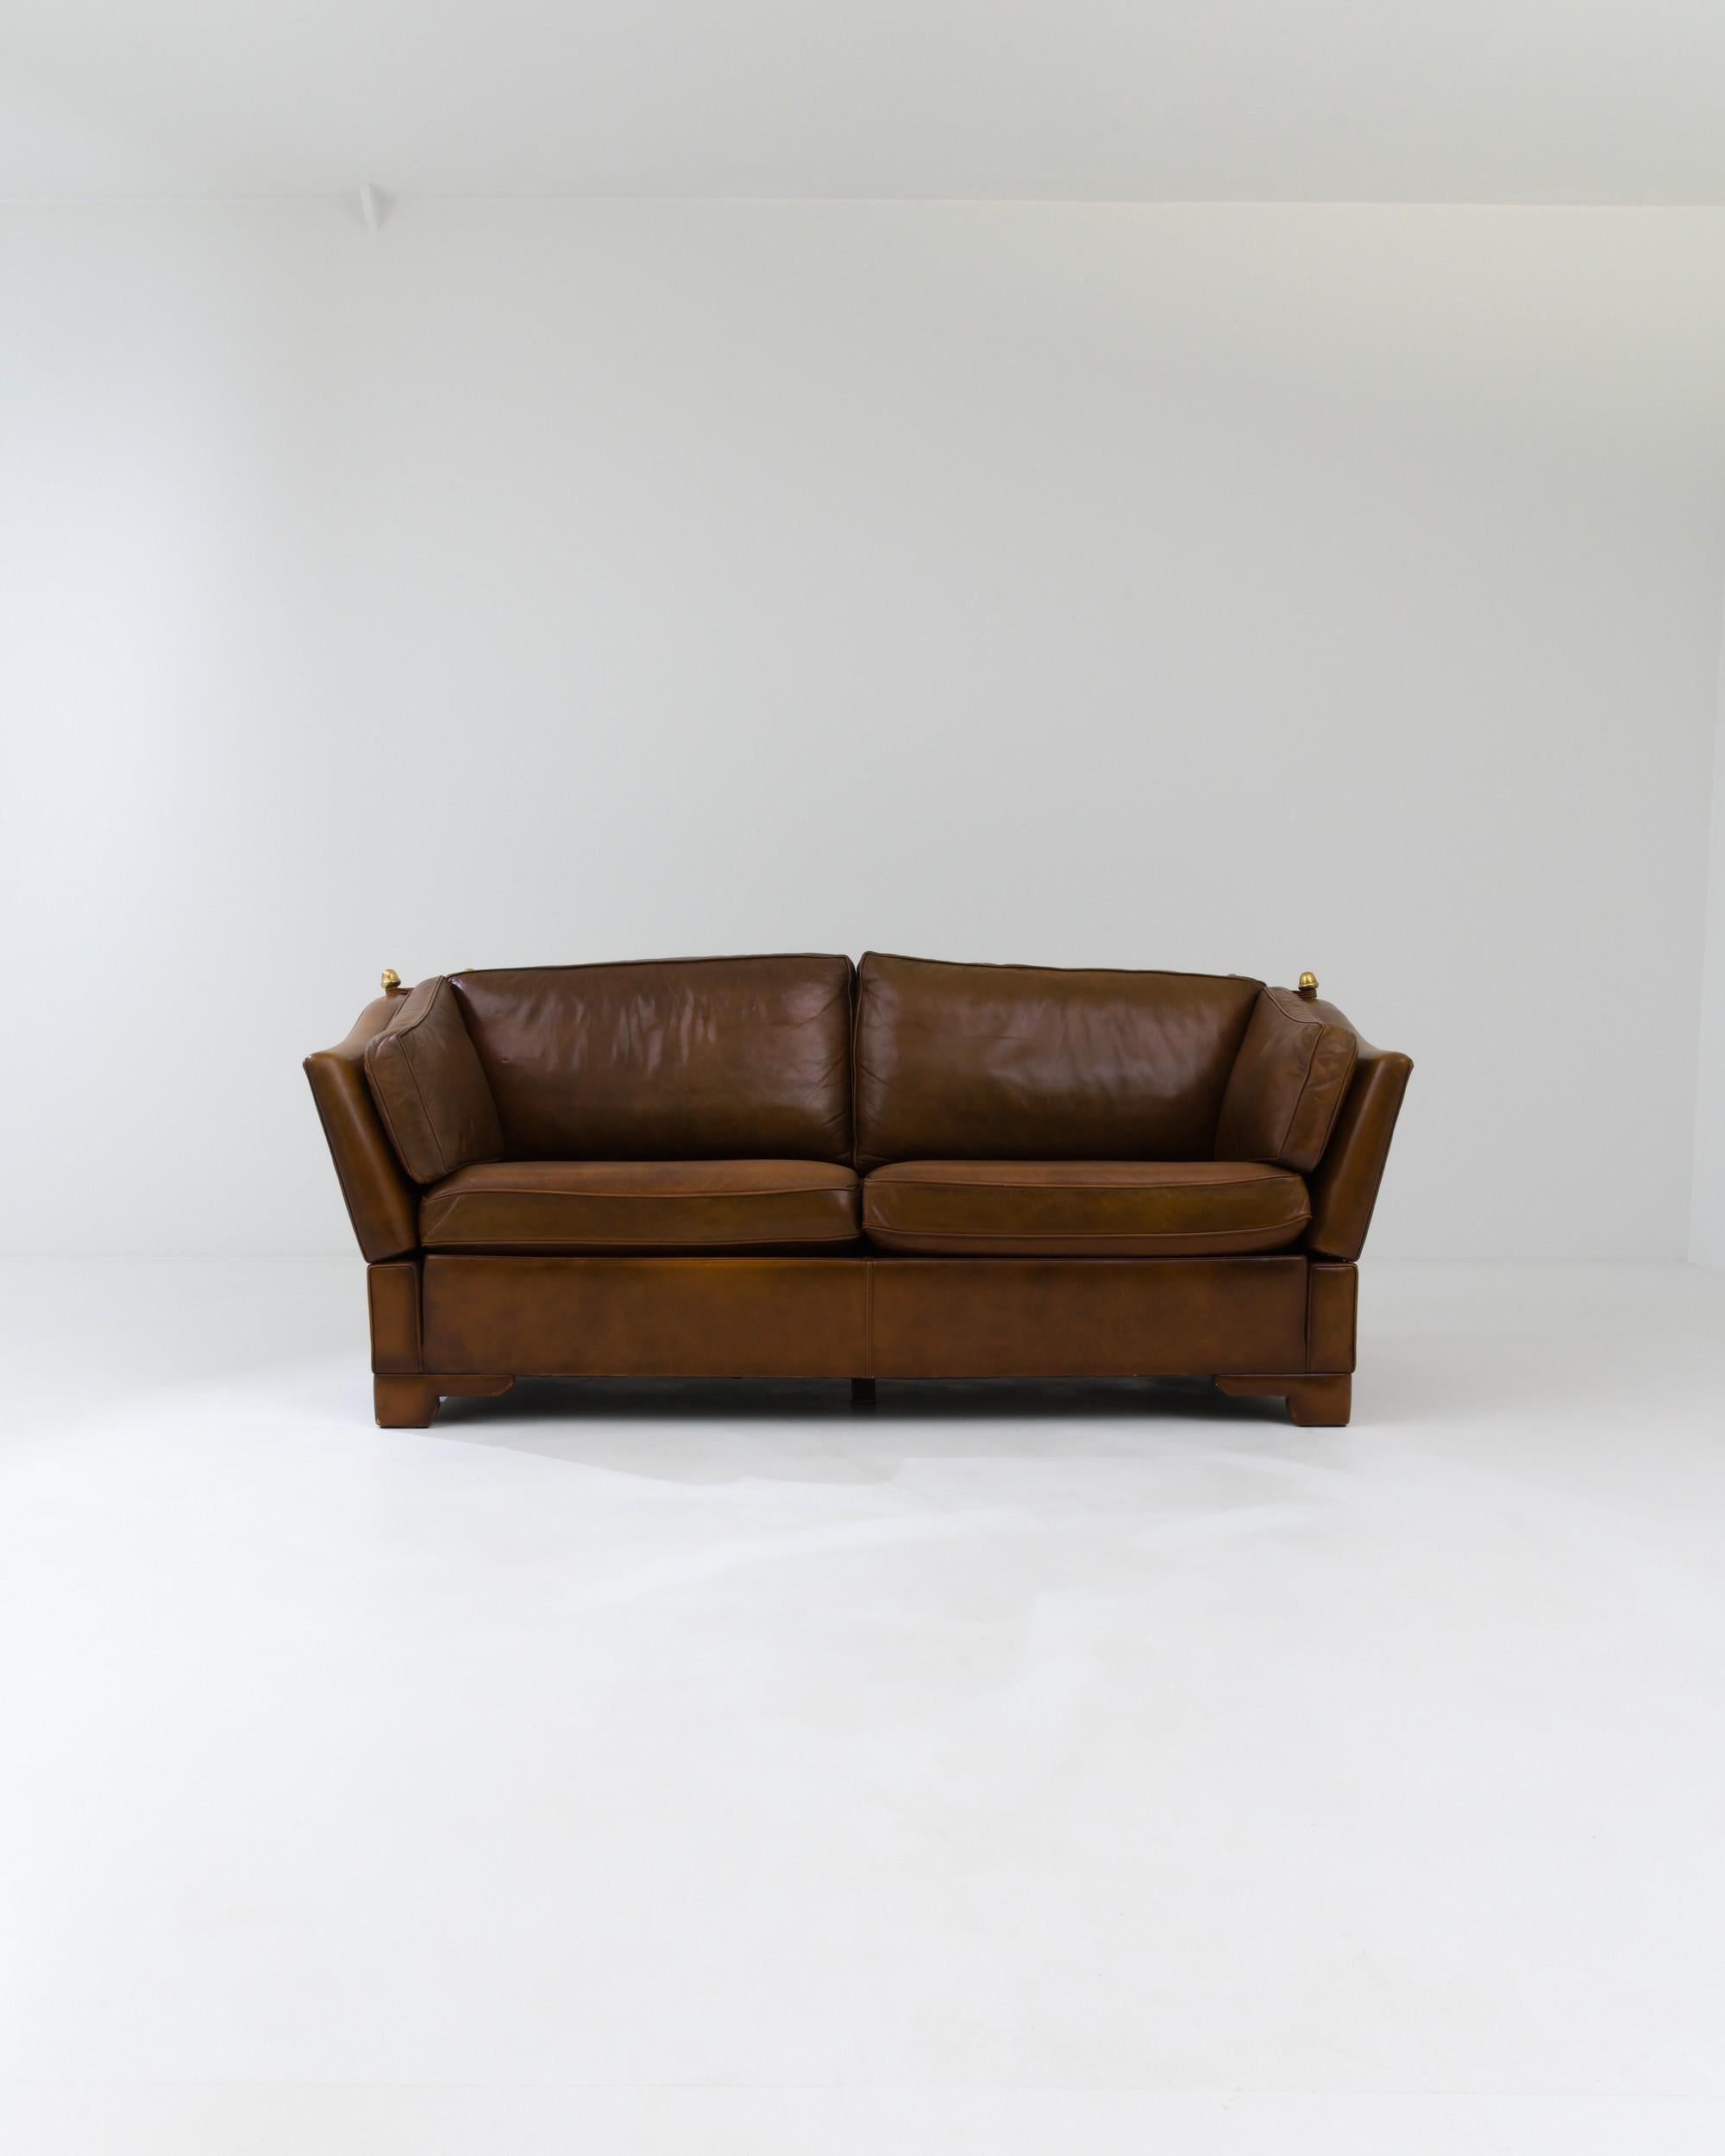 Designed in the UK circa 1970, this stylish leather two-seater sofa features an innovative design with adjustable sides that can be tightened or loosened using cords attached to the brass anchors. The tone of the high-quality leather gradually